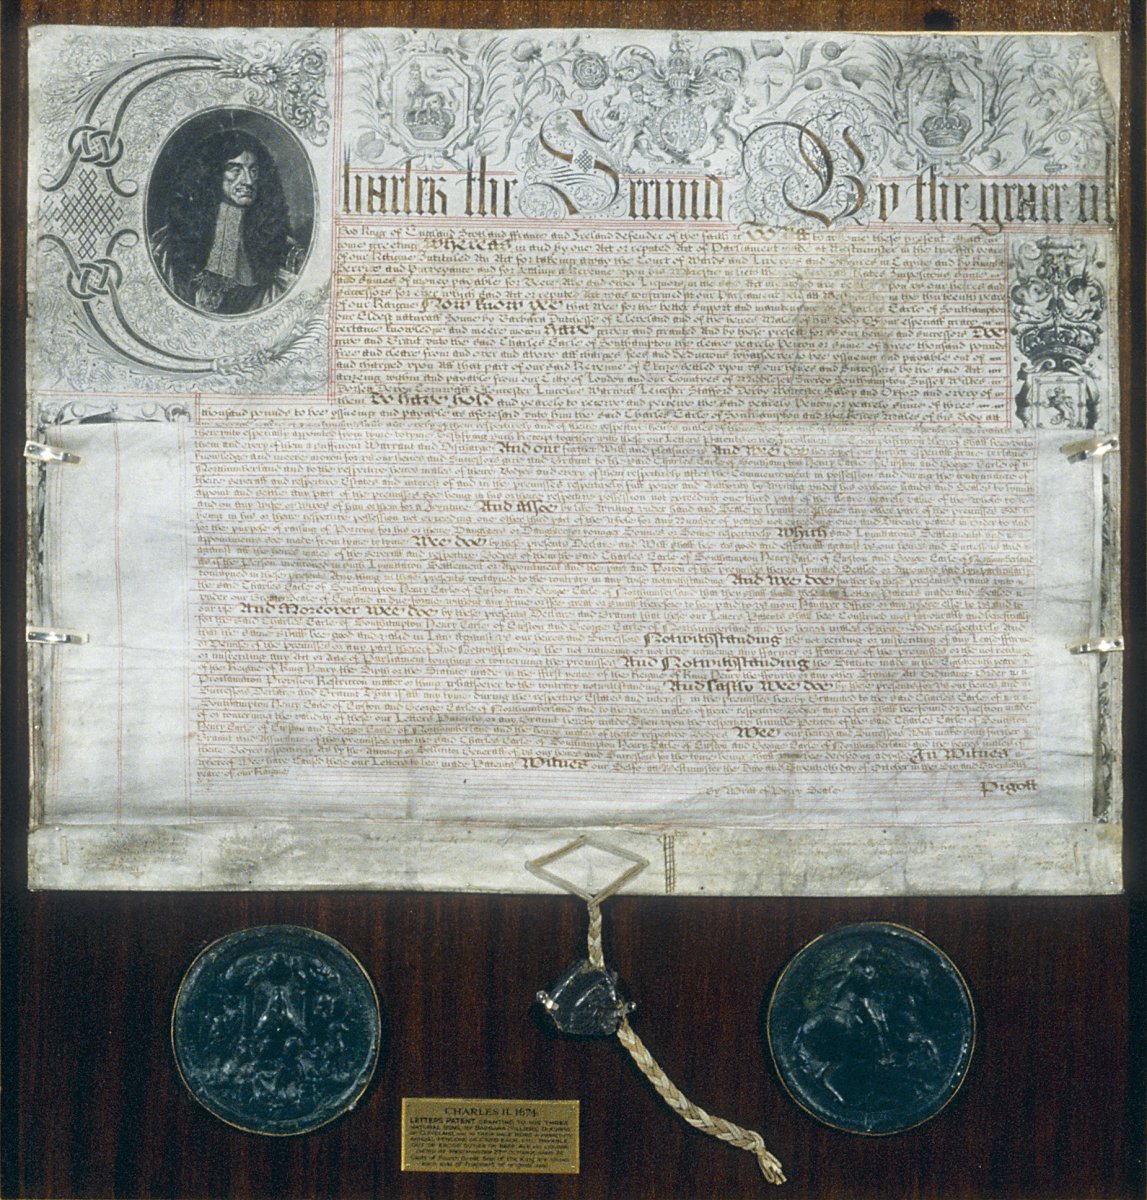 Image of Letters Patent of 1674 [whereby King Charles II grants a pension of £3,000 each per annum to his three sons by the Duchess of Cleveland, payable from Excise duties]